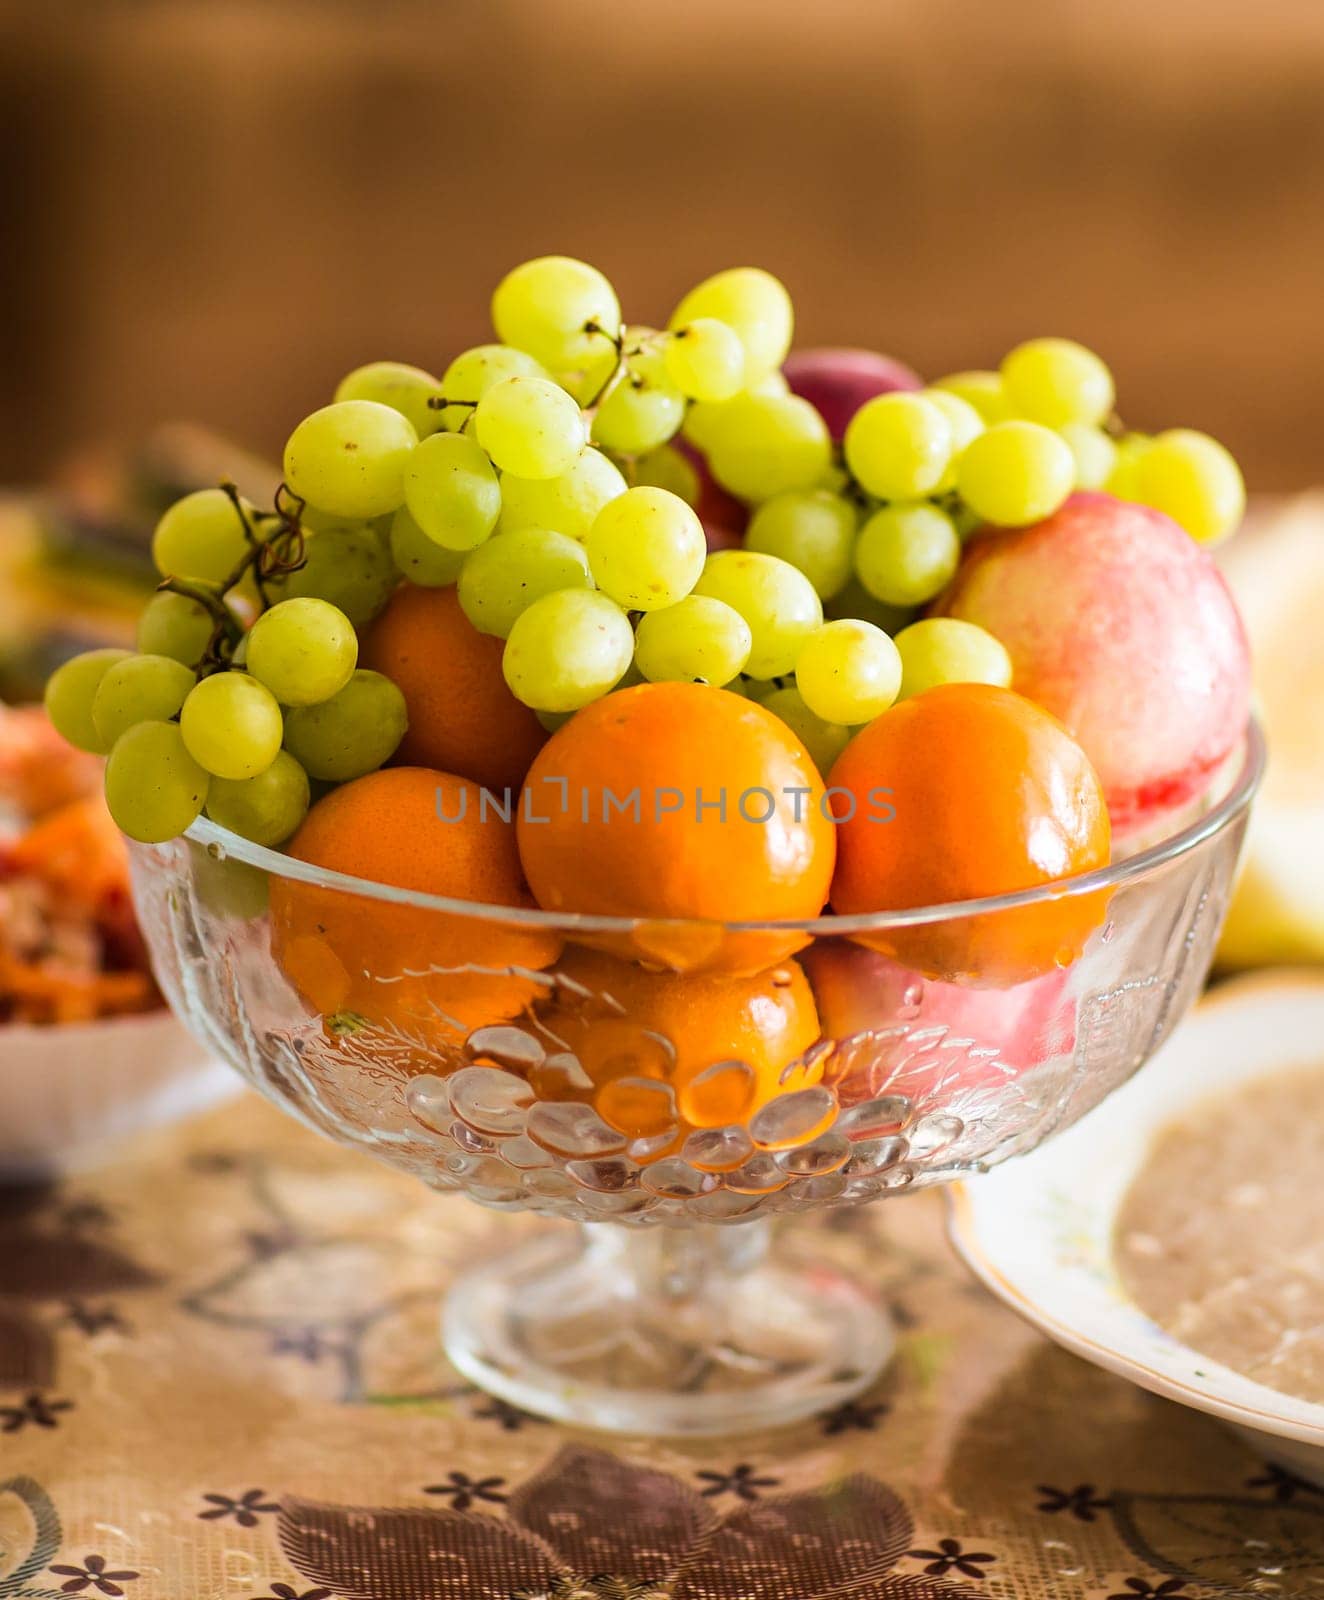 Fresh fruit party plate by Satura86